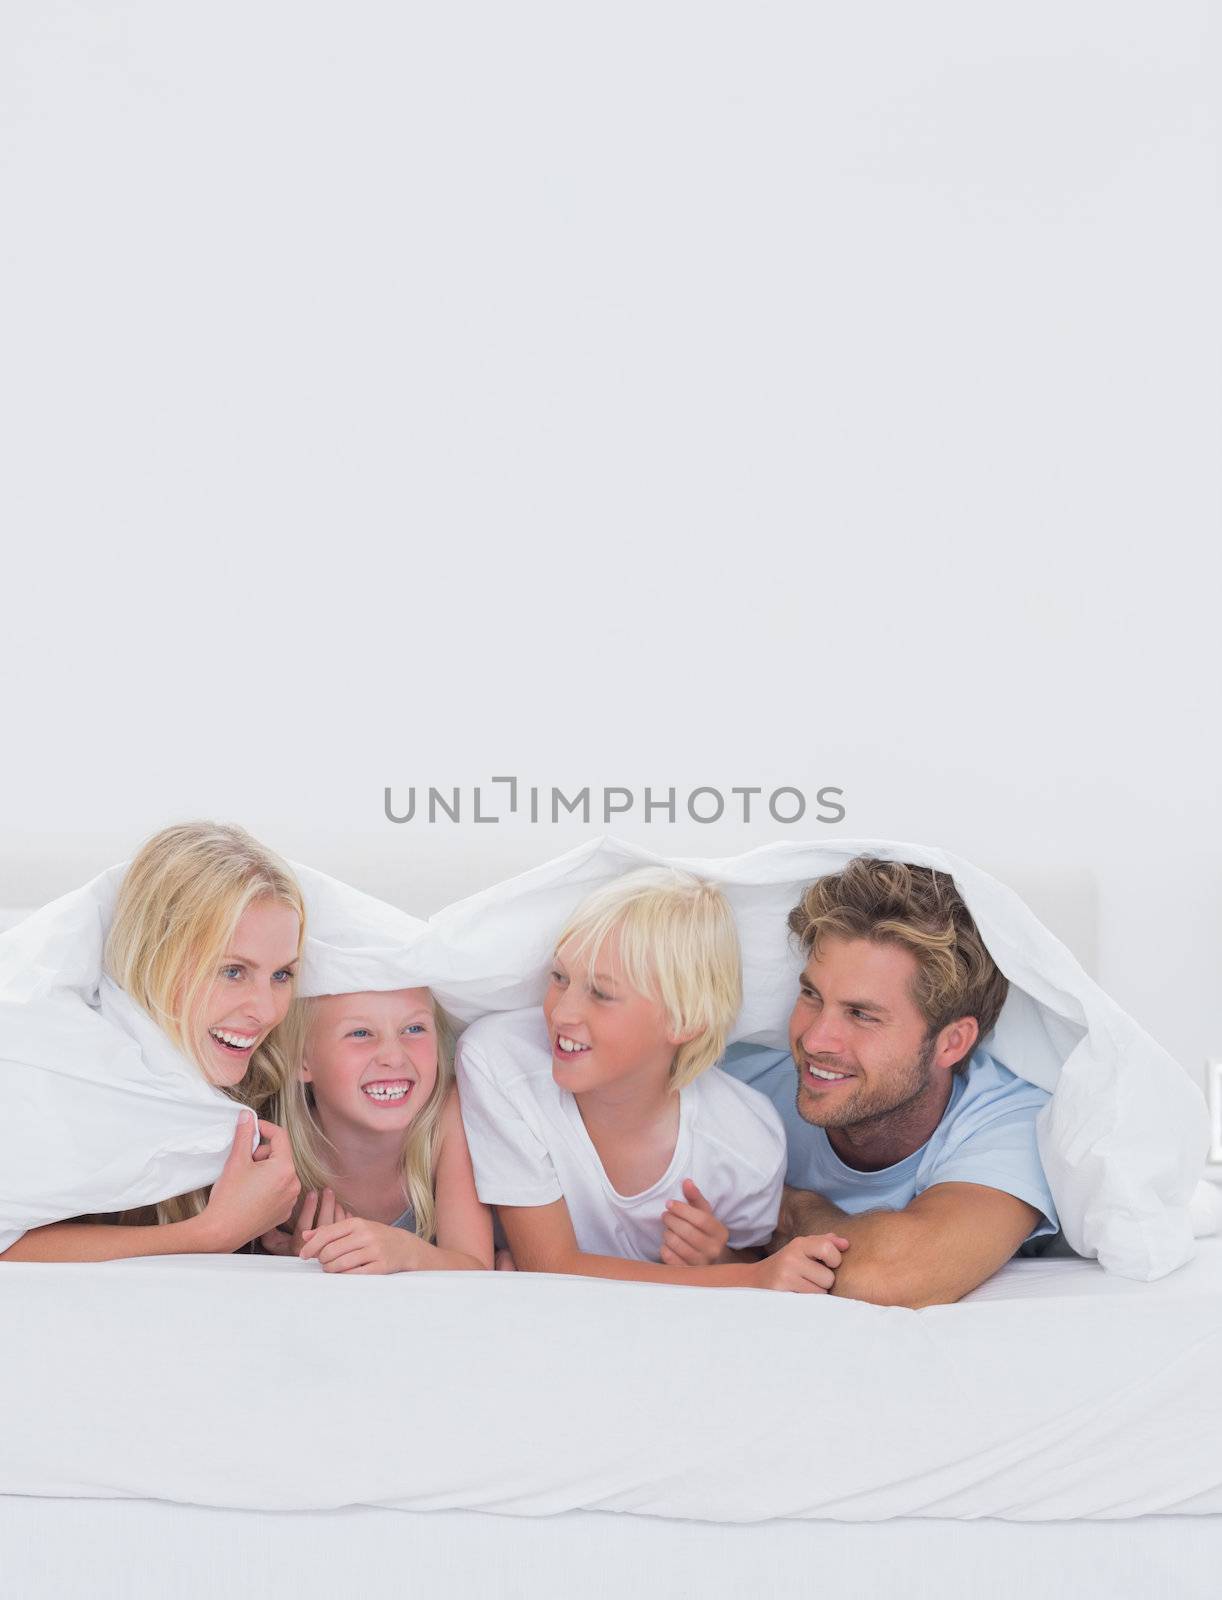 Cheerful family under the duvet at home in bed